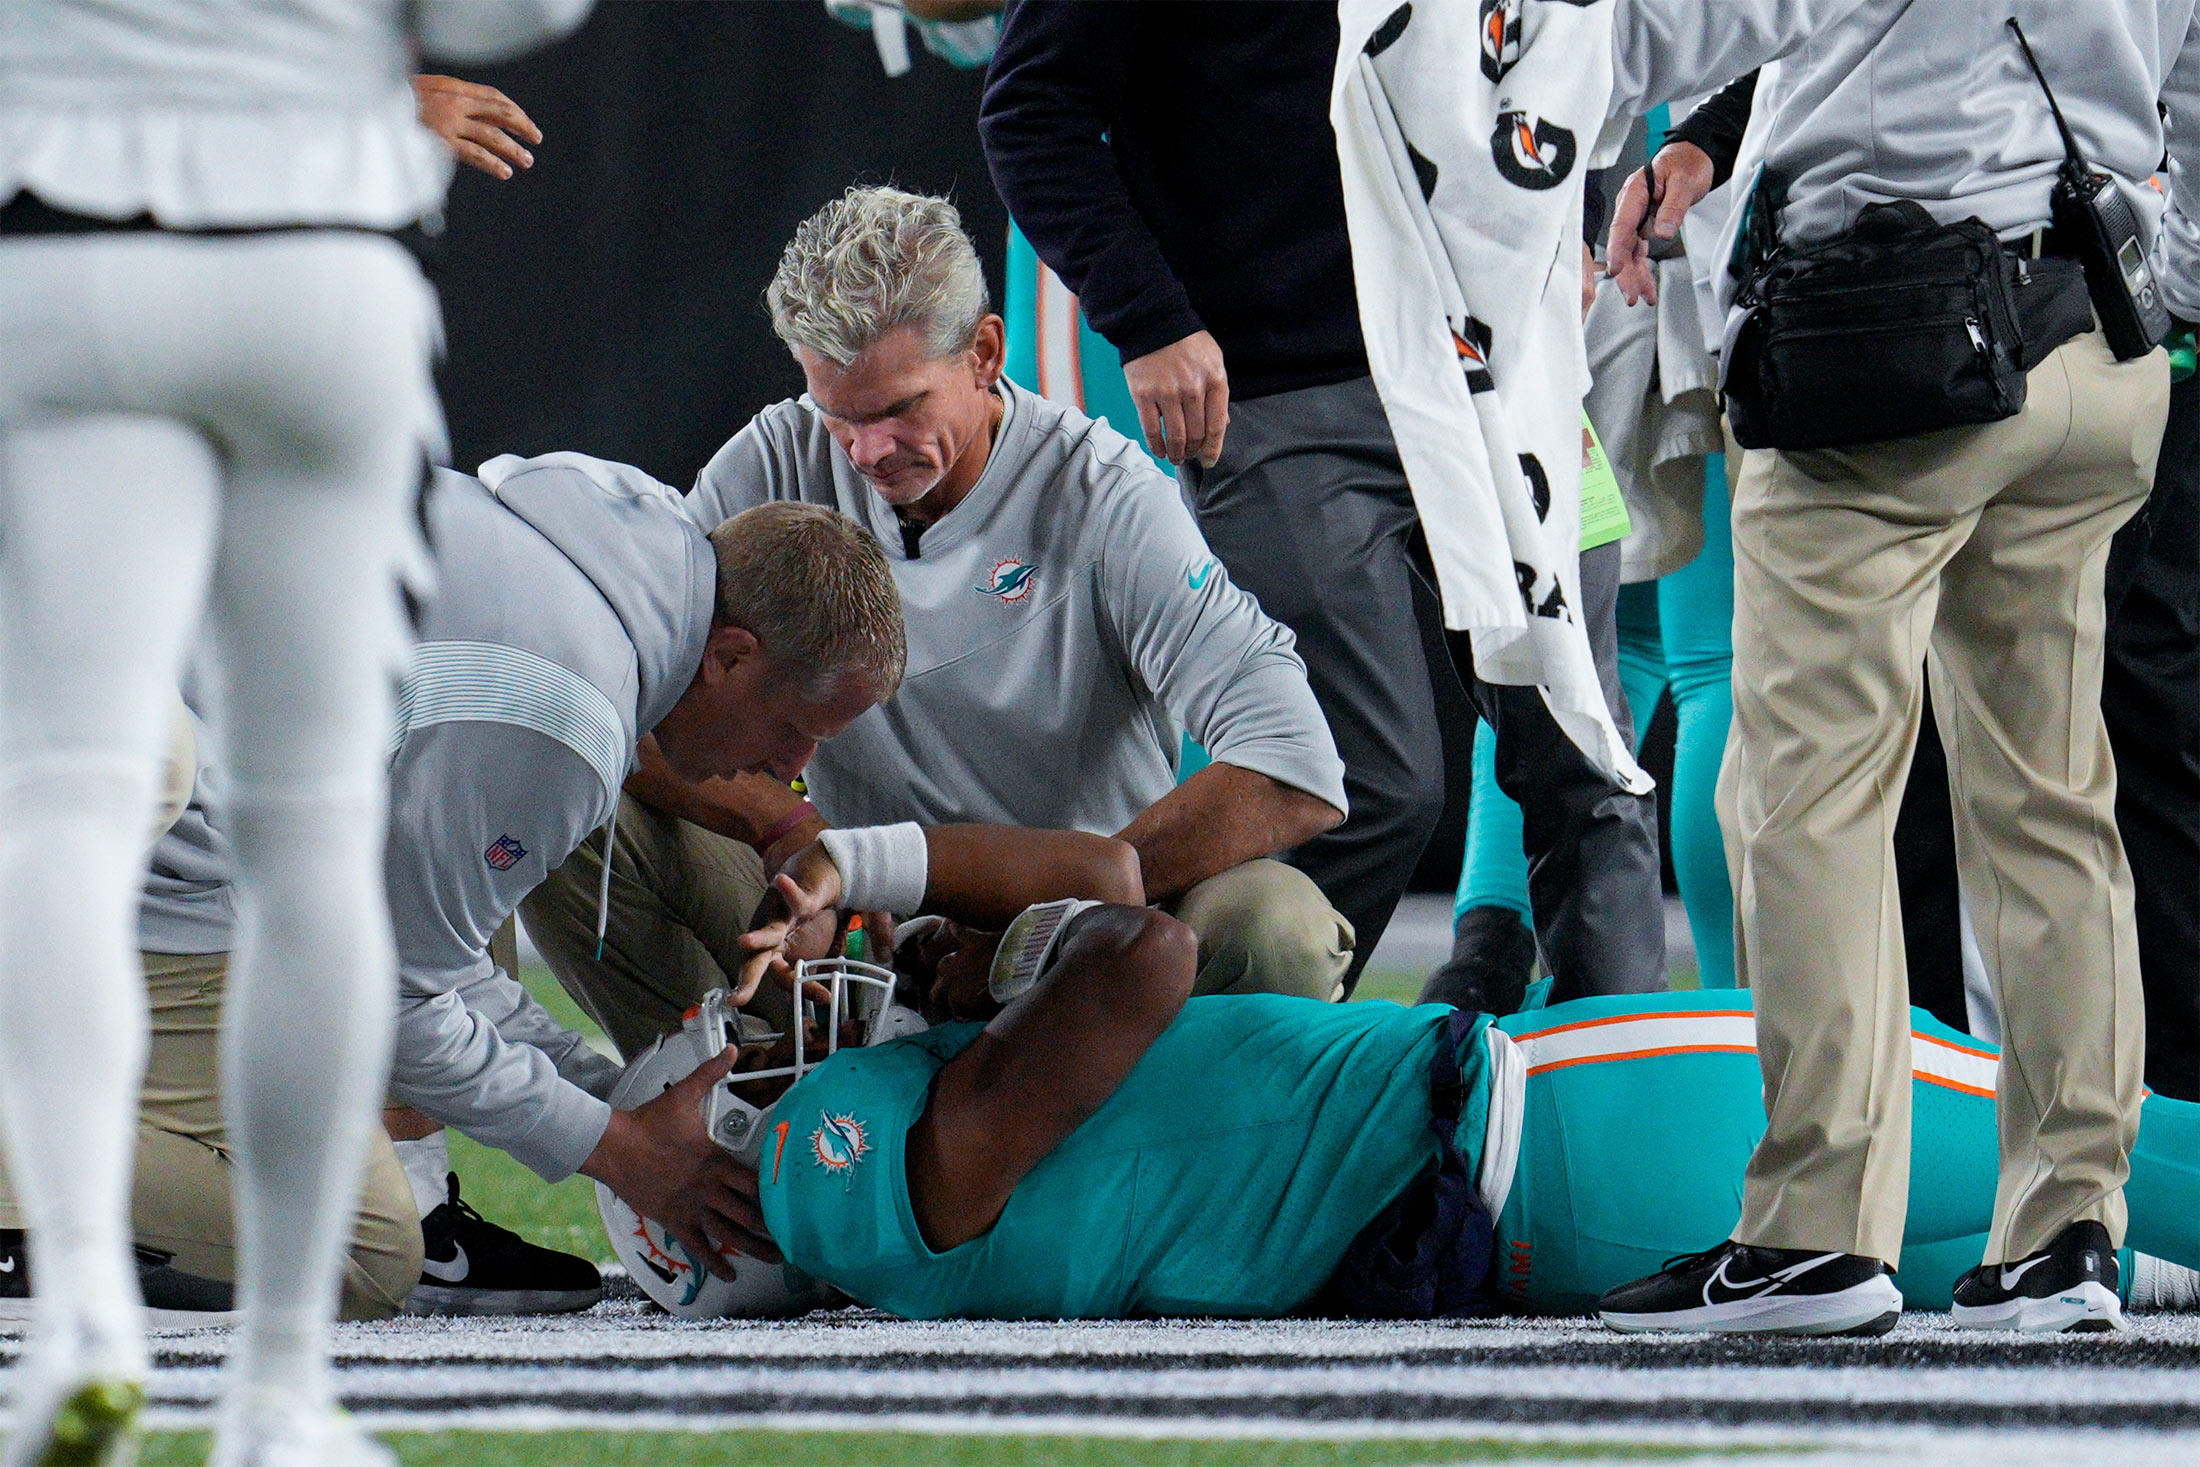 Dolphins' Tua Tagovailoa stretchered off field after blow to head